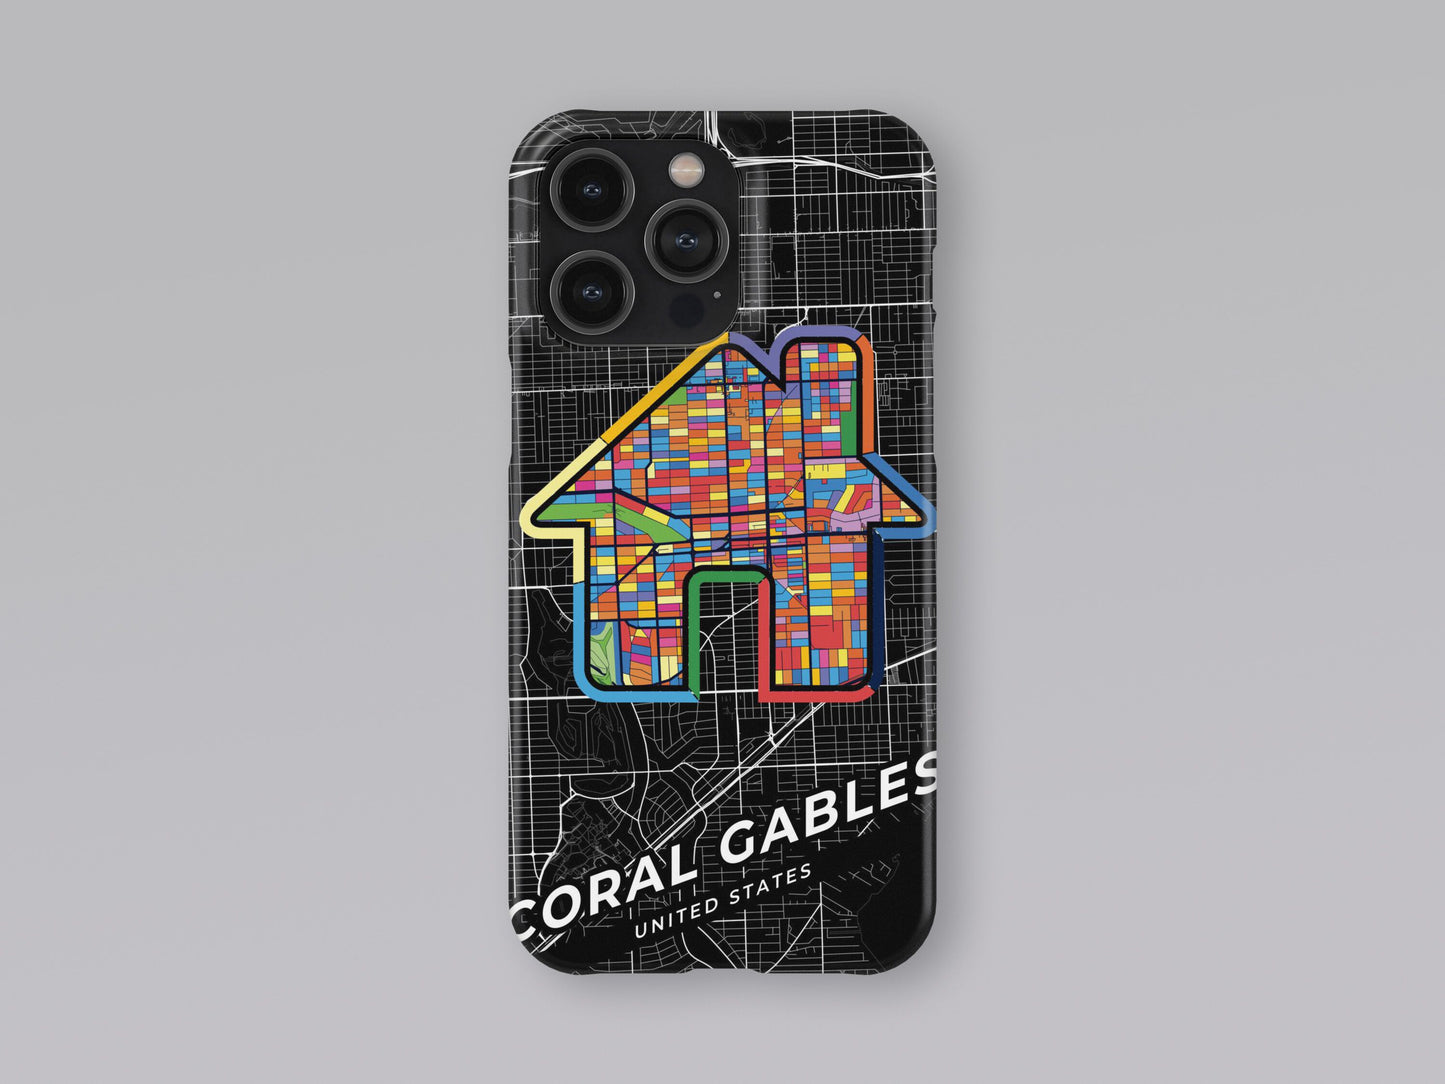 Coral Gables Florida slim phone case with colorful icon. Birthday, wedding or housewarming gift. Couple match cases. 3